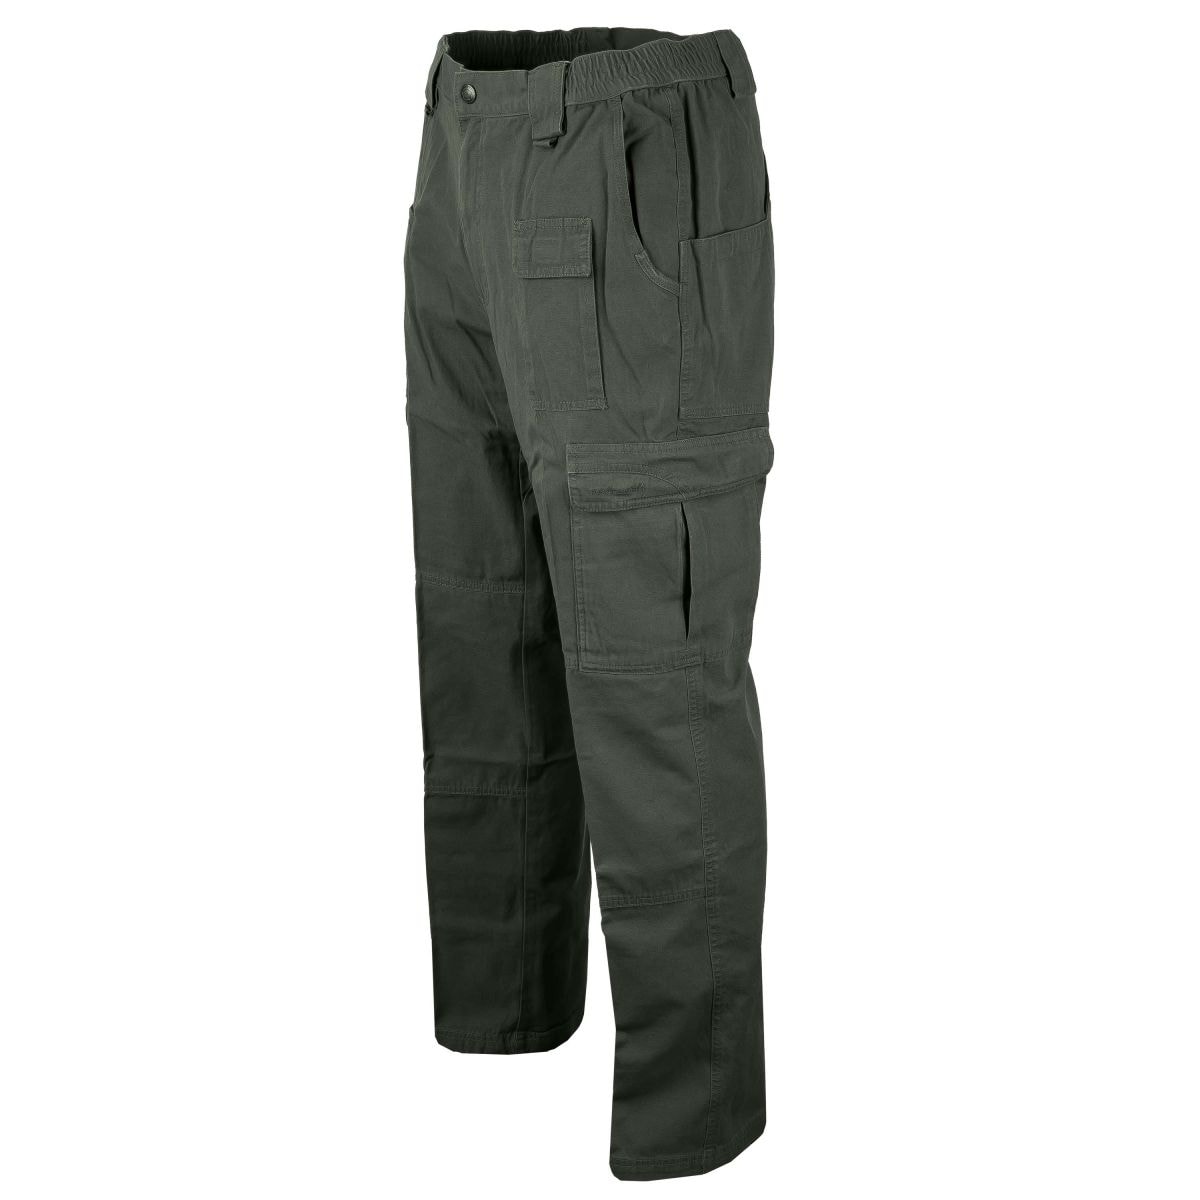 Purchase the Pentagon Pants Elgon 3.0 Tactical olive by ASMC